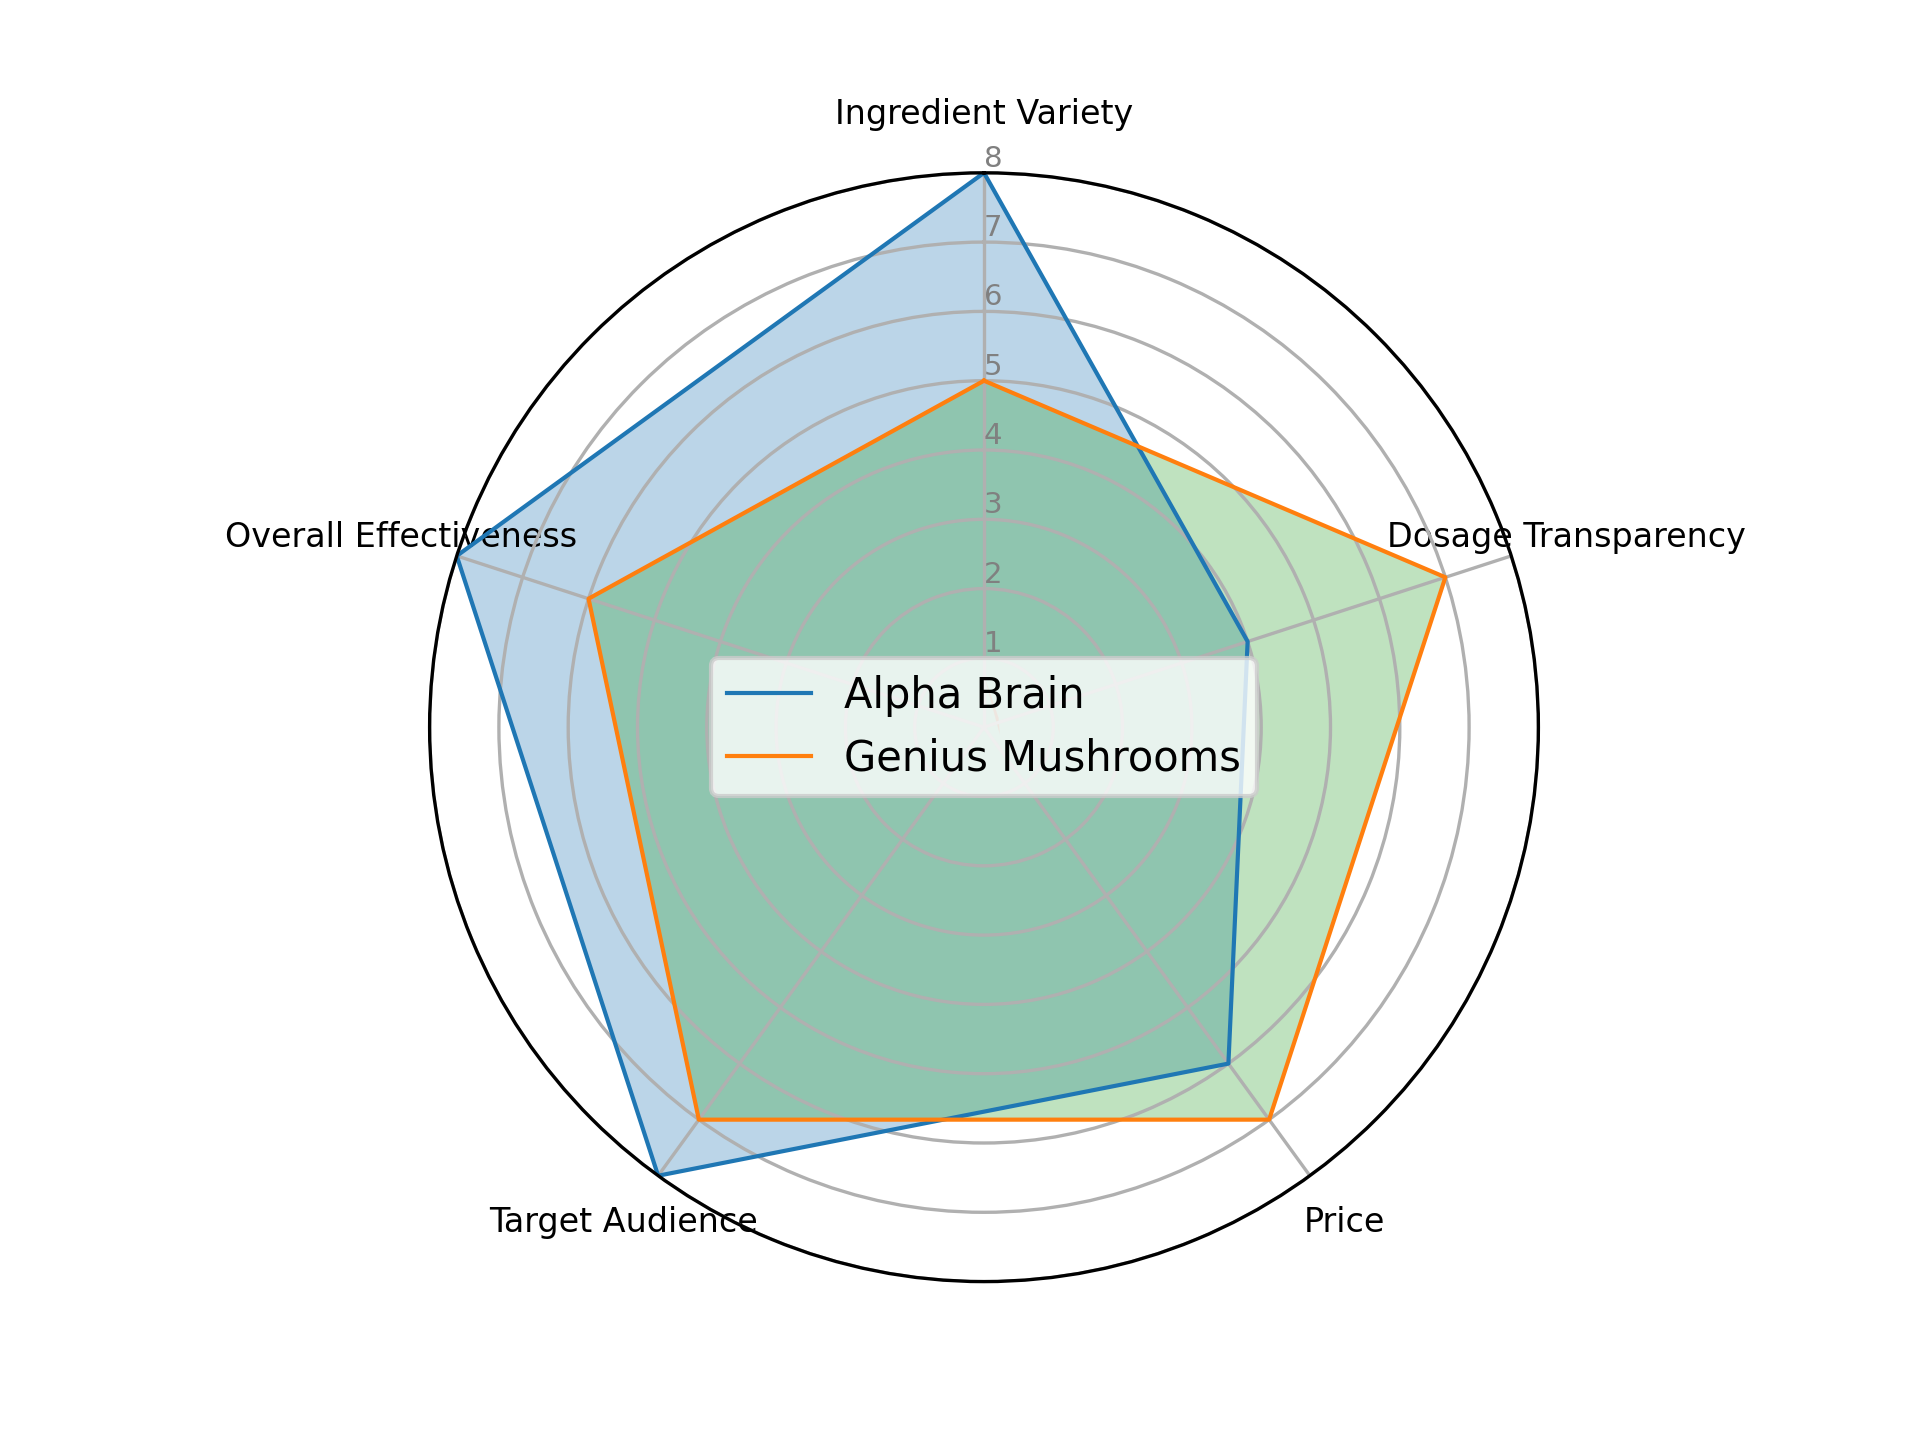  A spider plot comparing the benefits of Alpha Brain and Genius Mushrooms